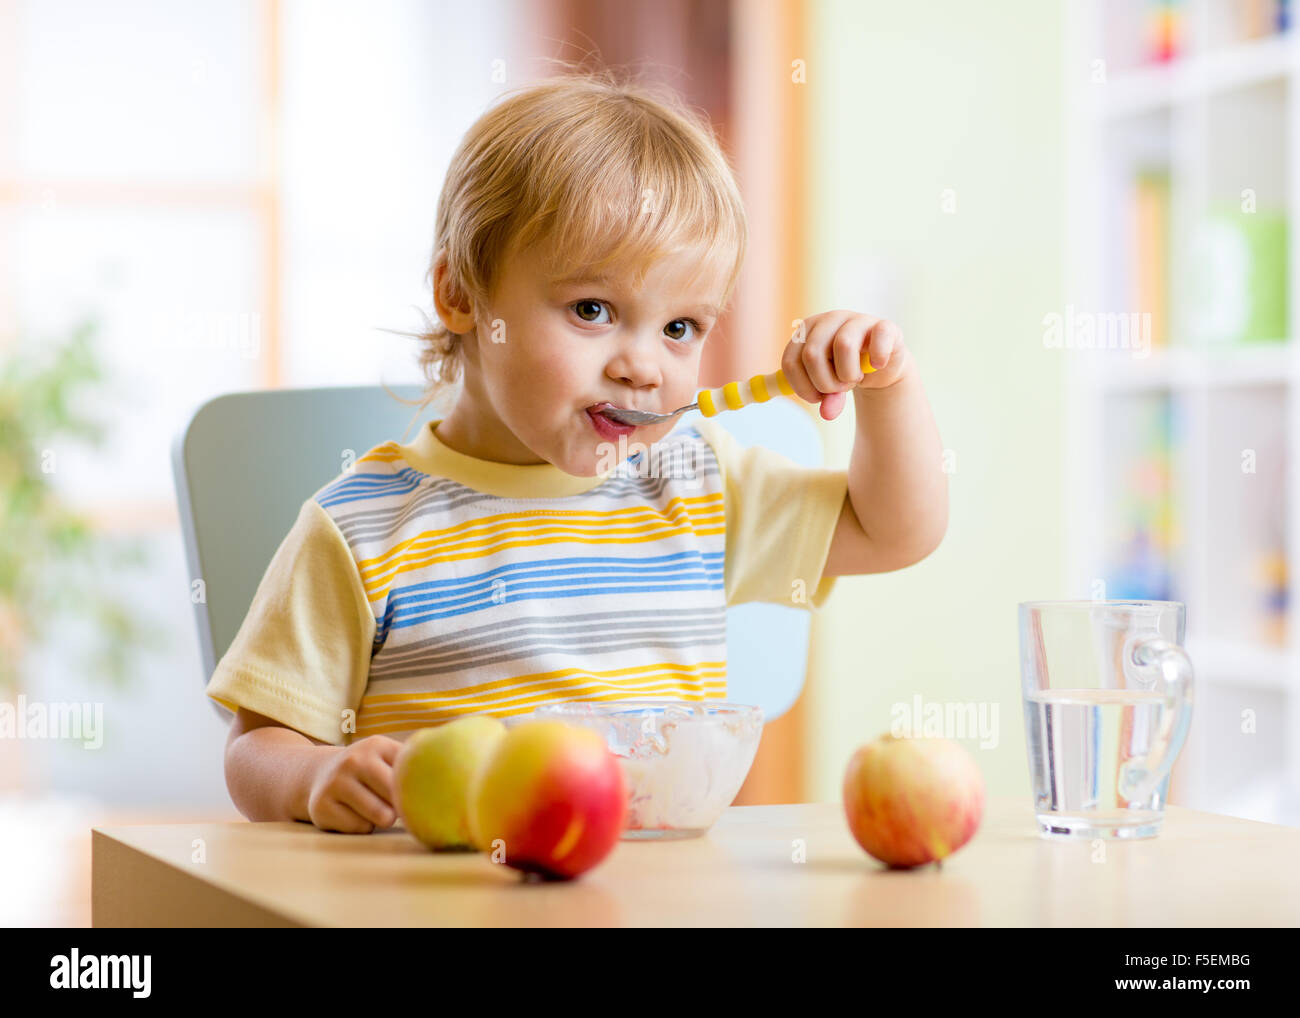 child eating healthy food with with the left hand at home Stock Photo